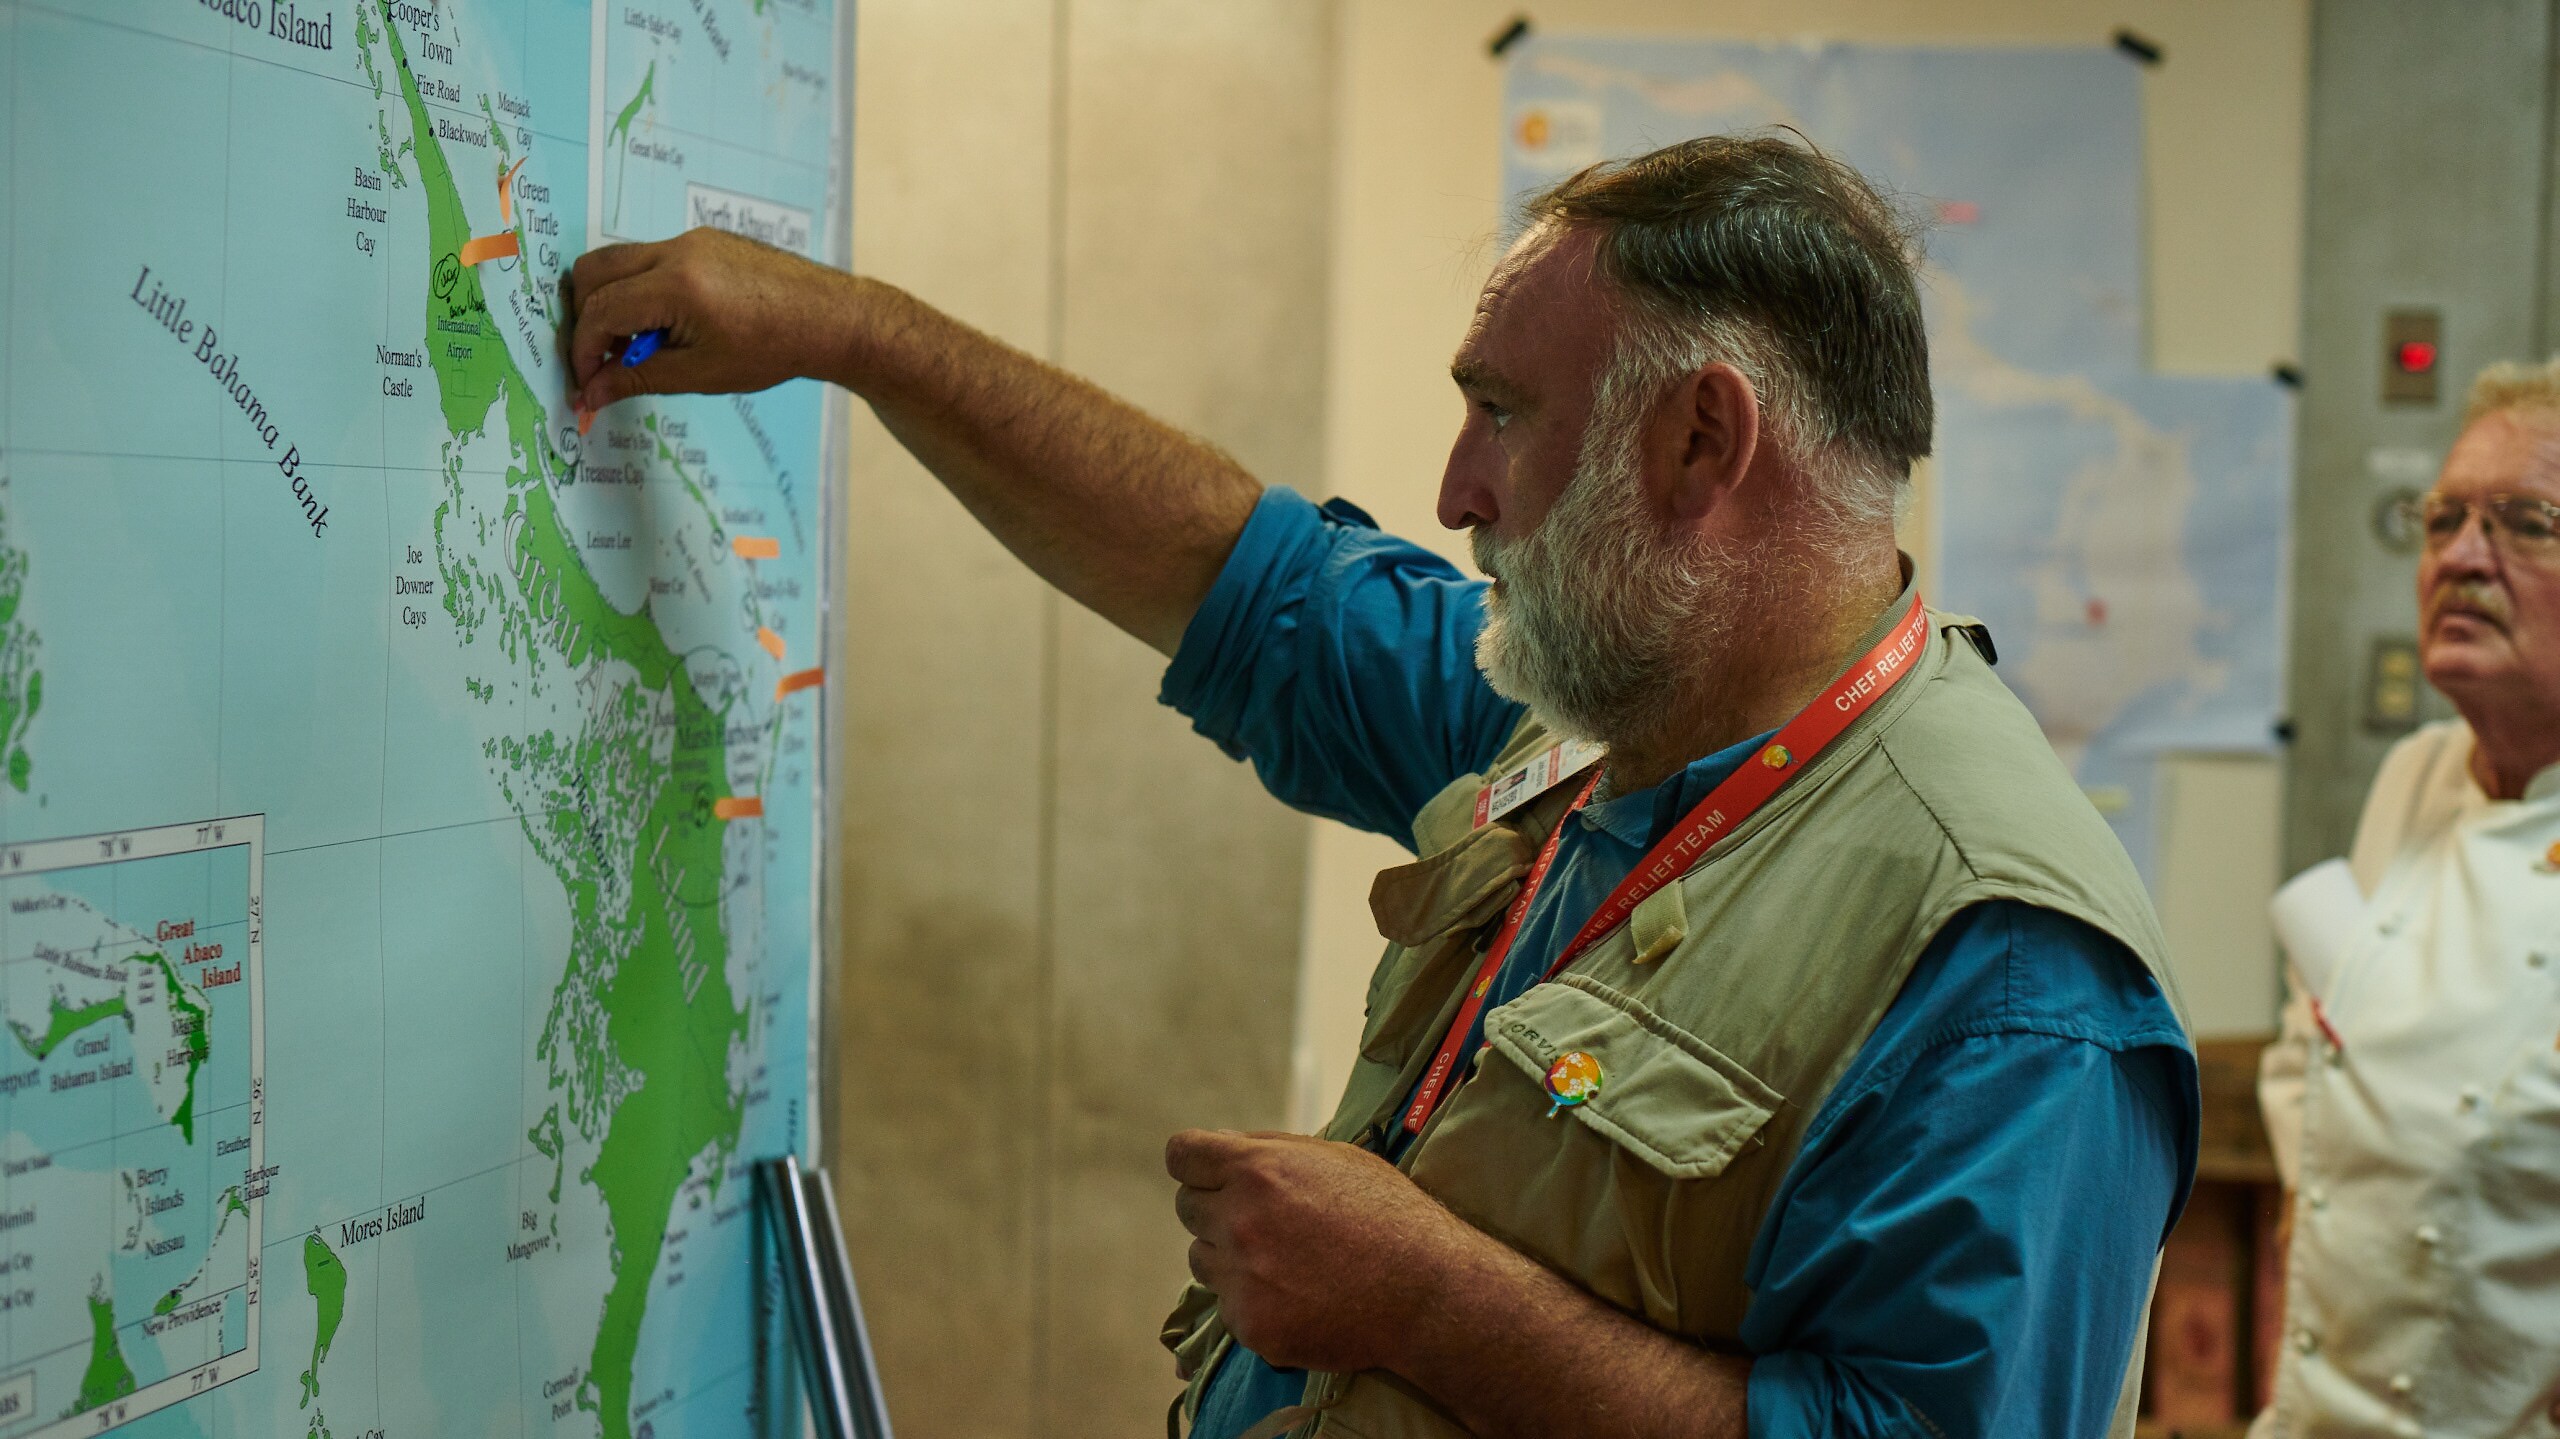 José Andrés uses arrows to denote where World Central Kitchen distribution points are on a map of Great Abaco Island in the Bahamas. (Credit: National Geographic/Emily Caldwell)